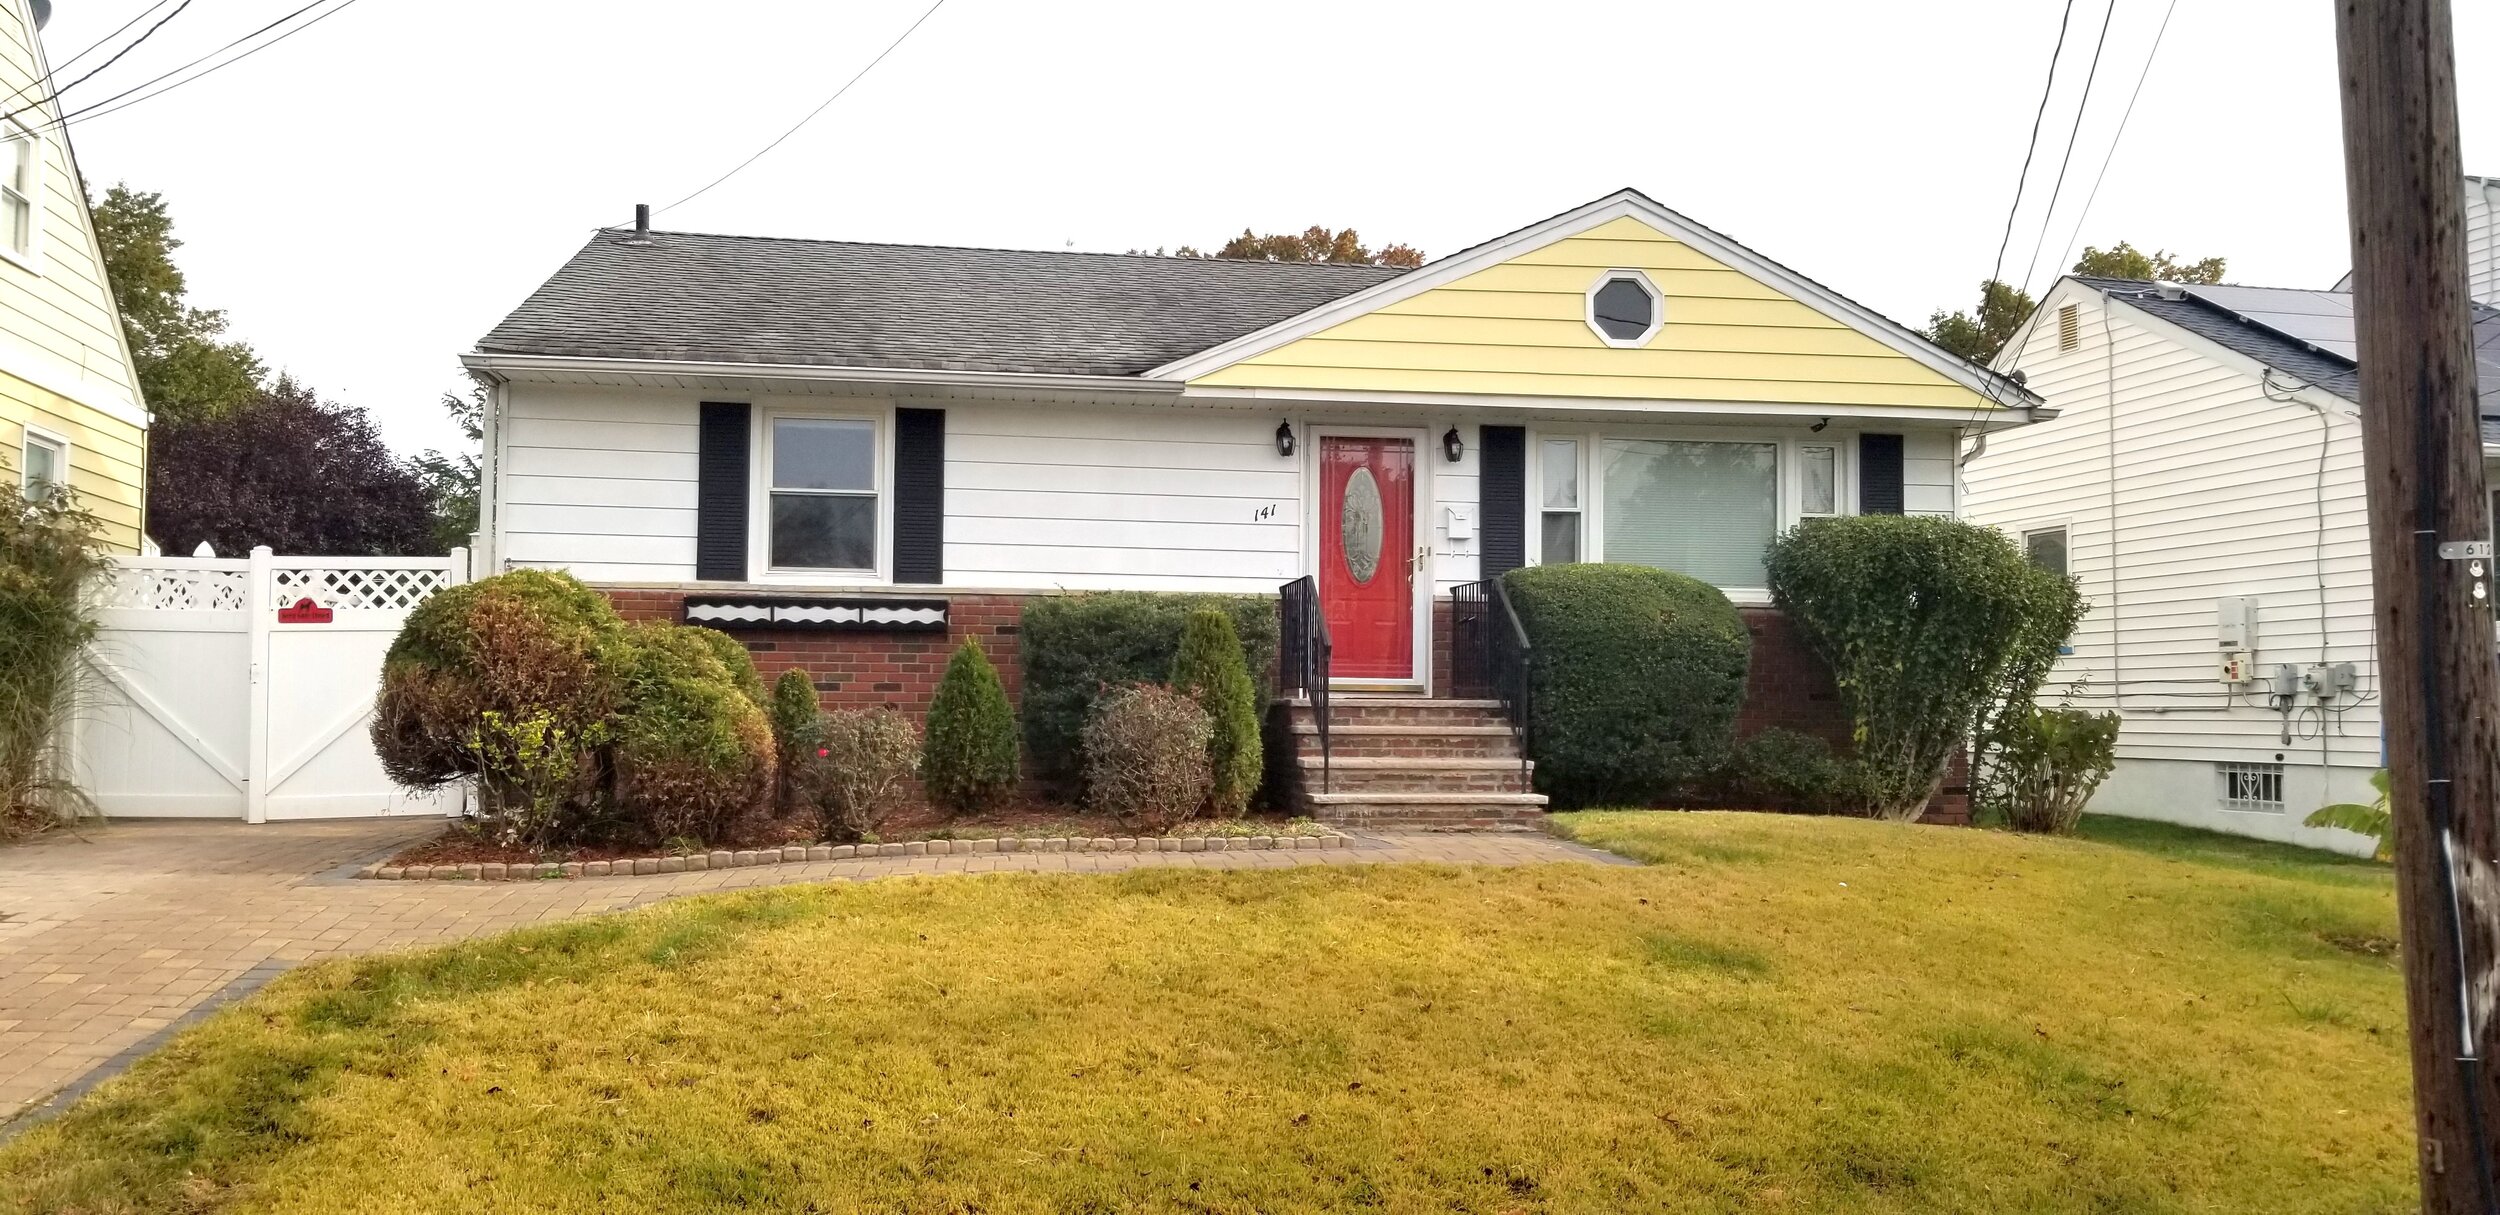 141 W. Inman Ave, Rahway - Sold 